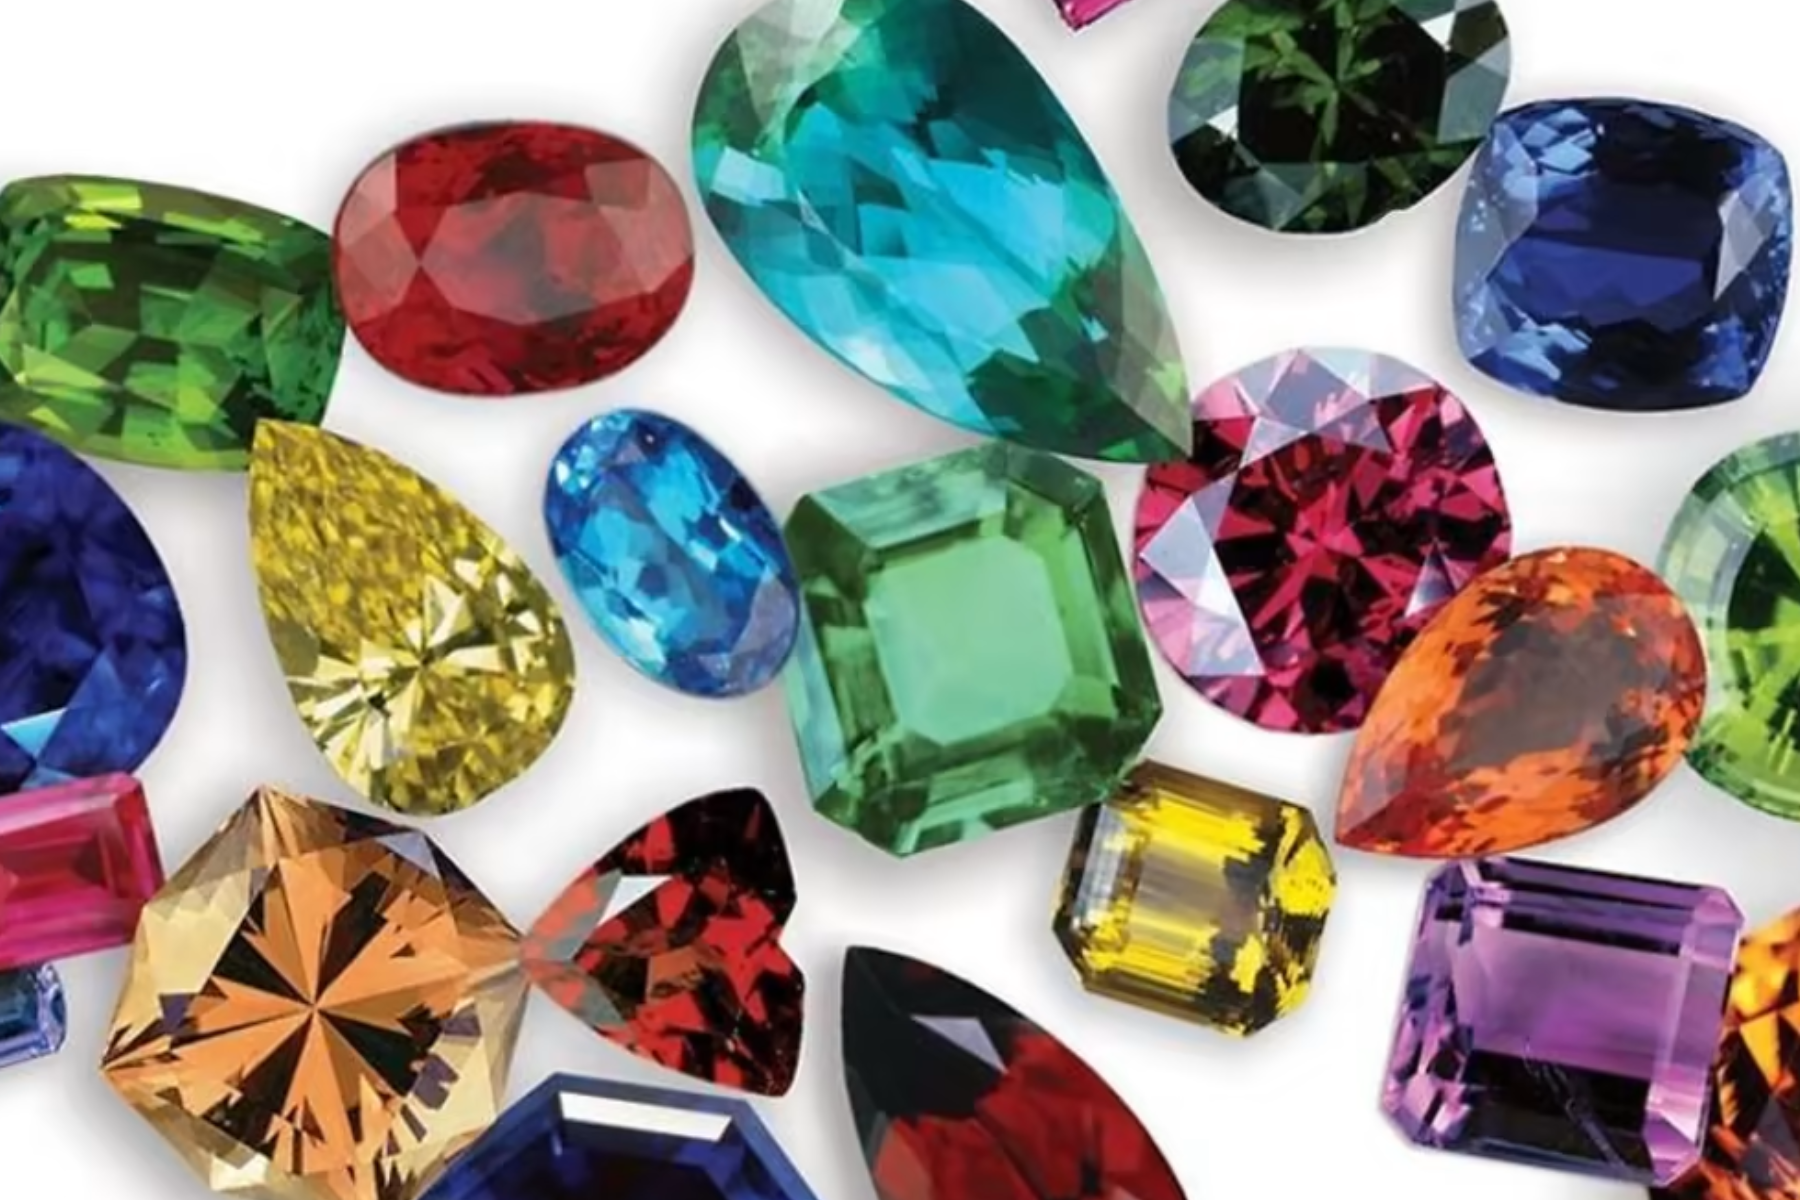 Colored gemstones of various sizes and shapes